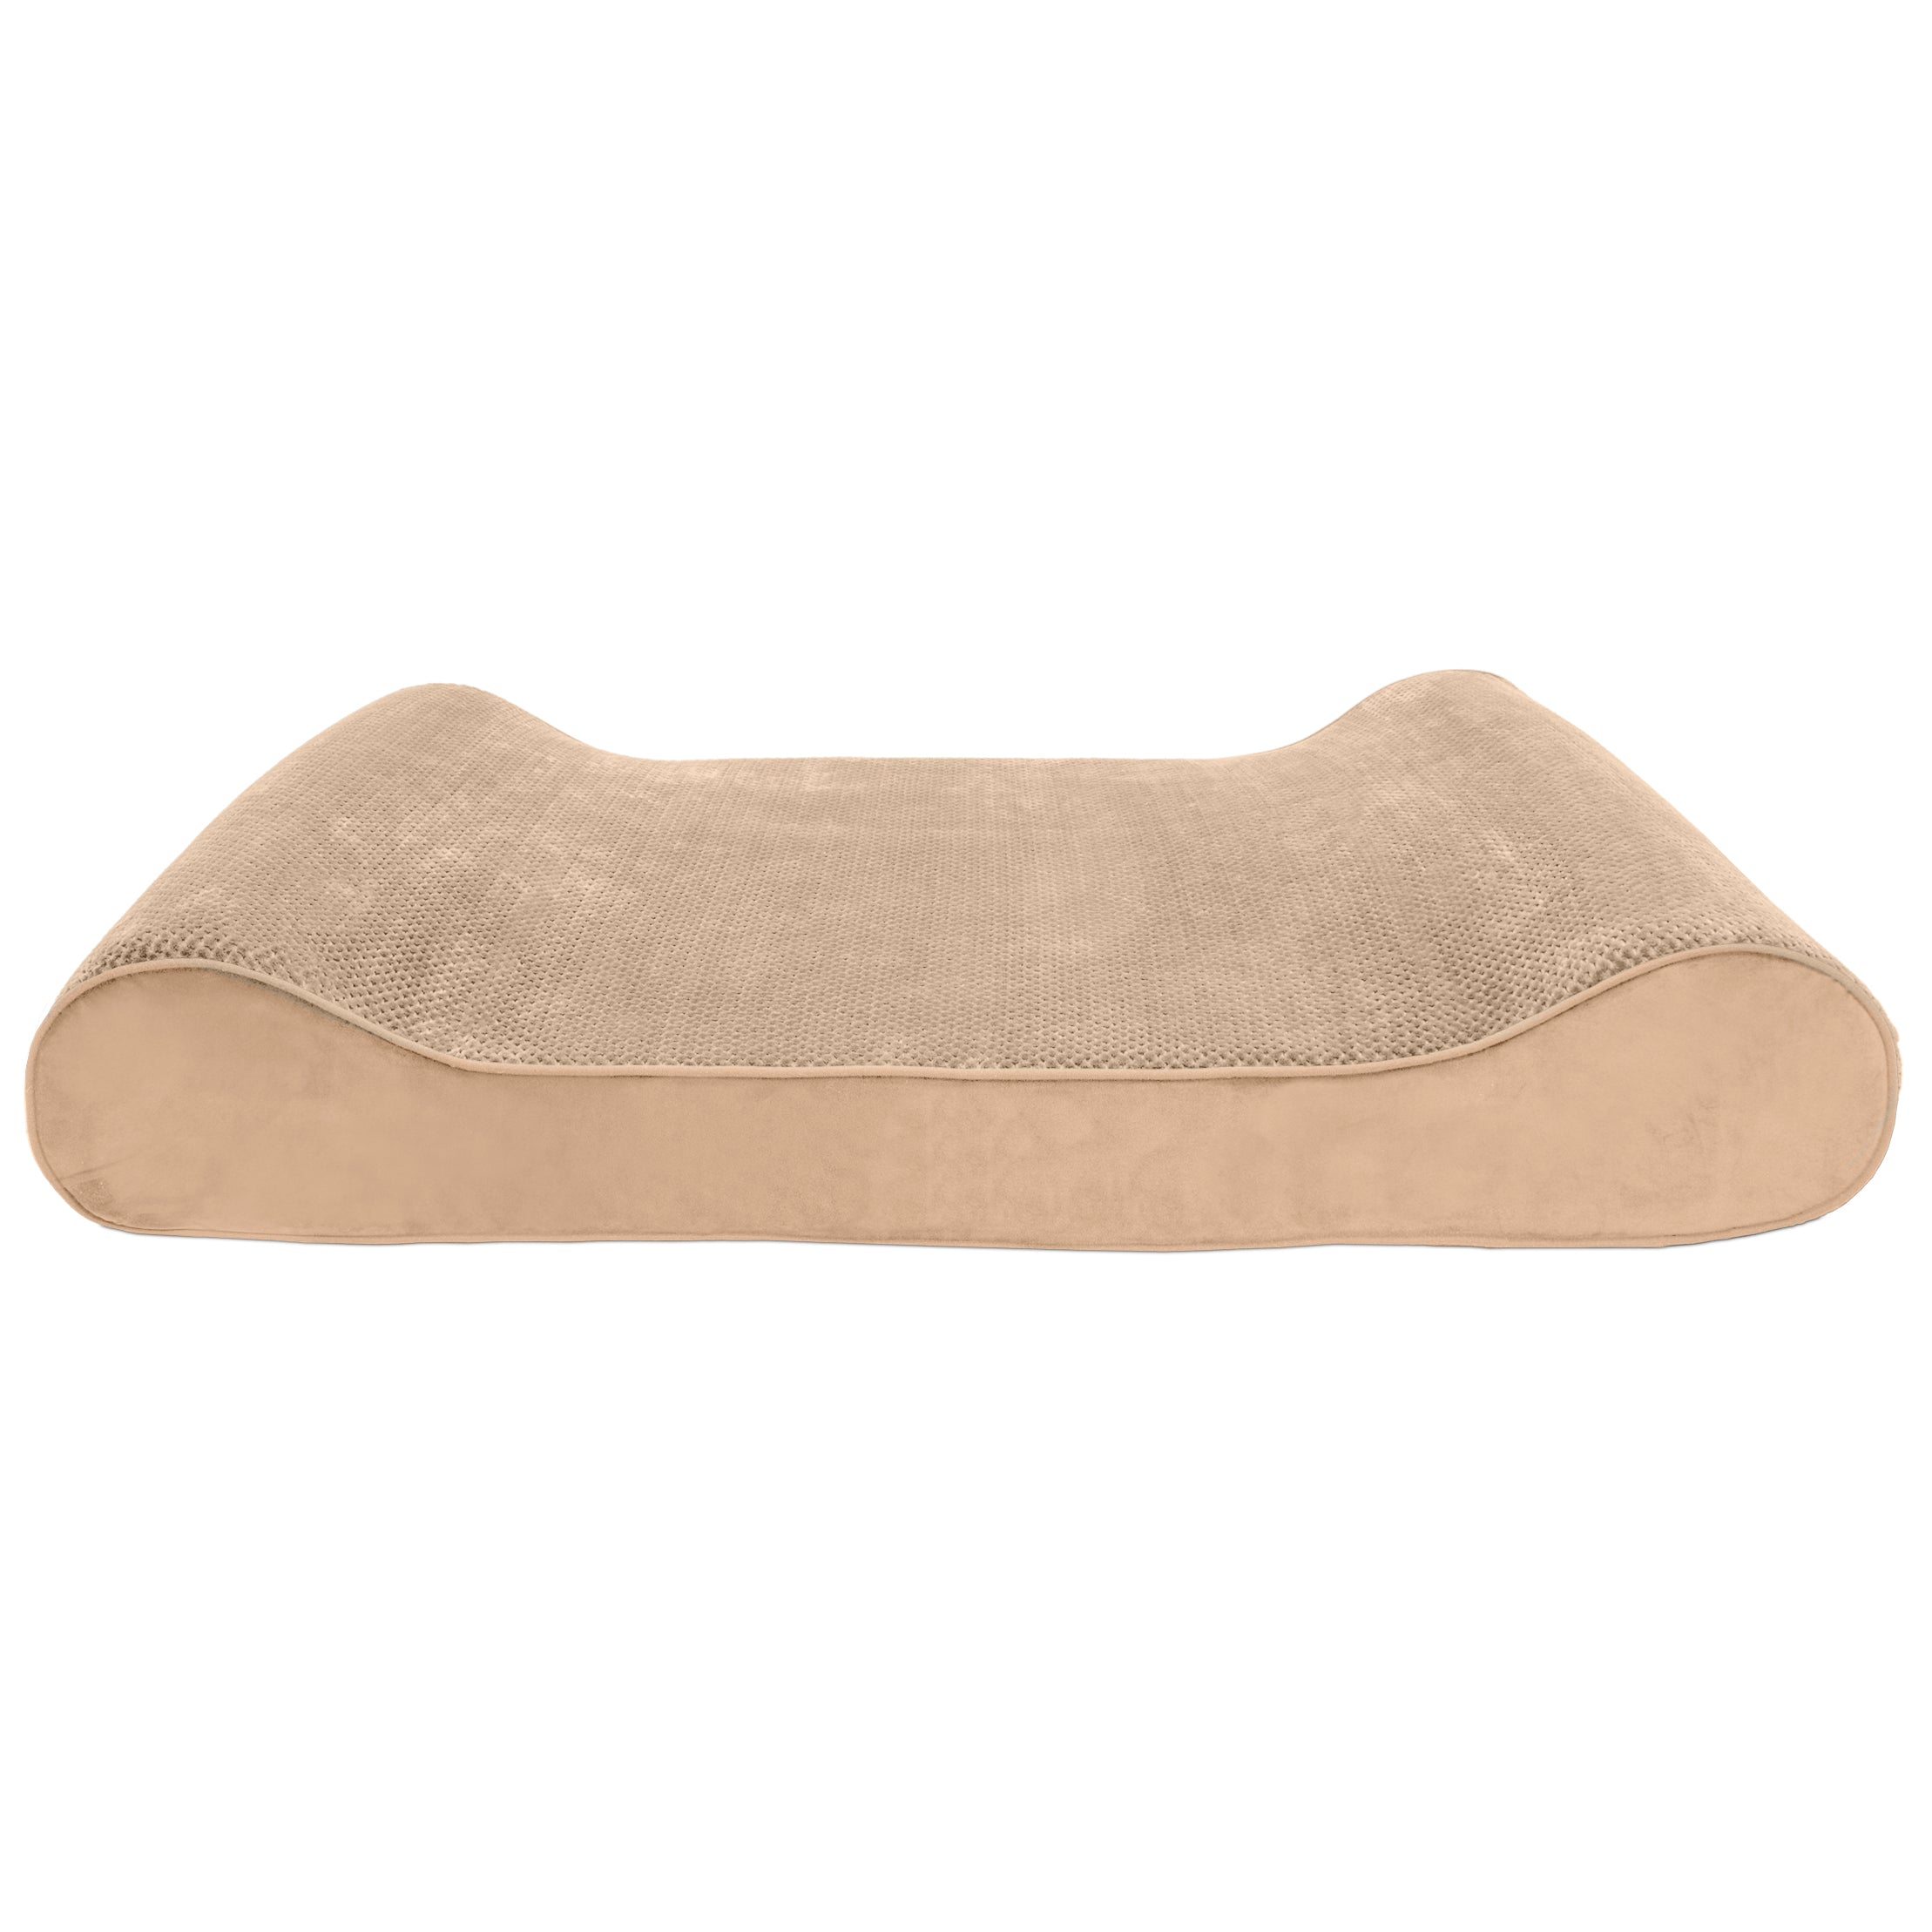 FurHaven | Cooling Gel Minky Plush and Velvet Luxe Lounger Pet Bed for Dogs and Cats， Camel， Giant